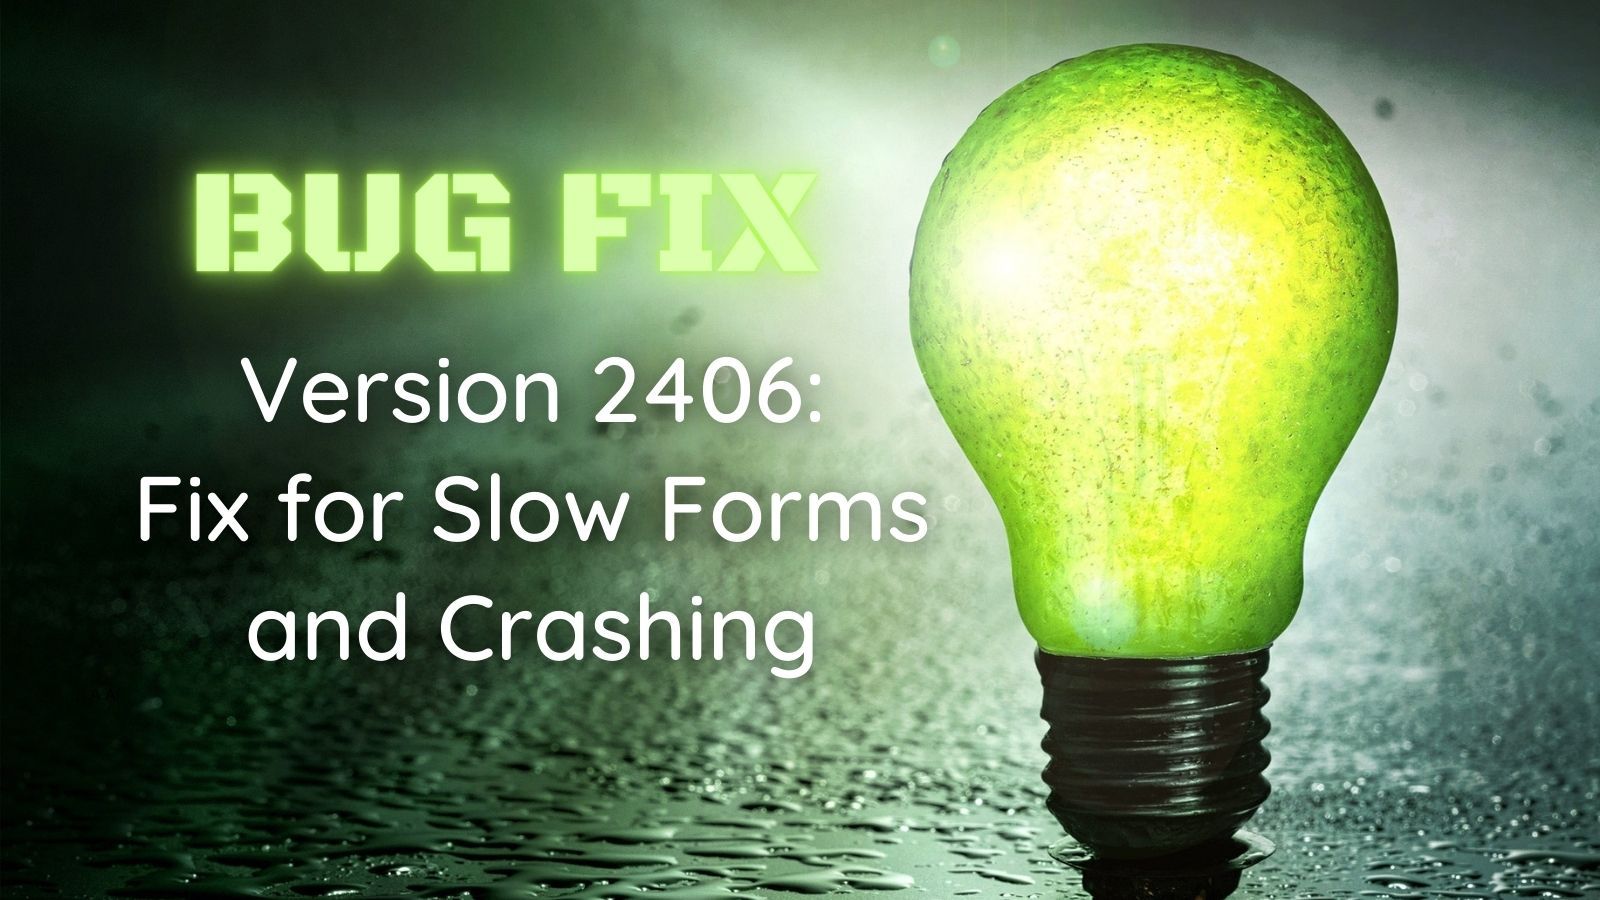 Bug Fix: Access Version 2406 Fixes the Slow Forms and Crashing Bug From 2405